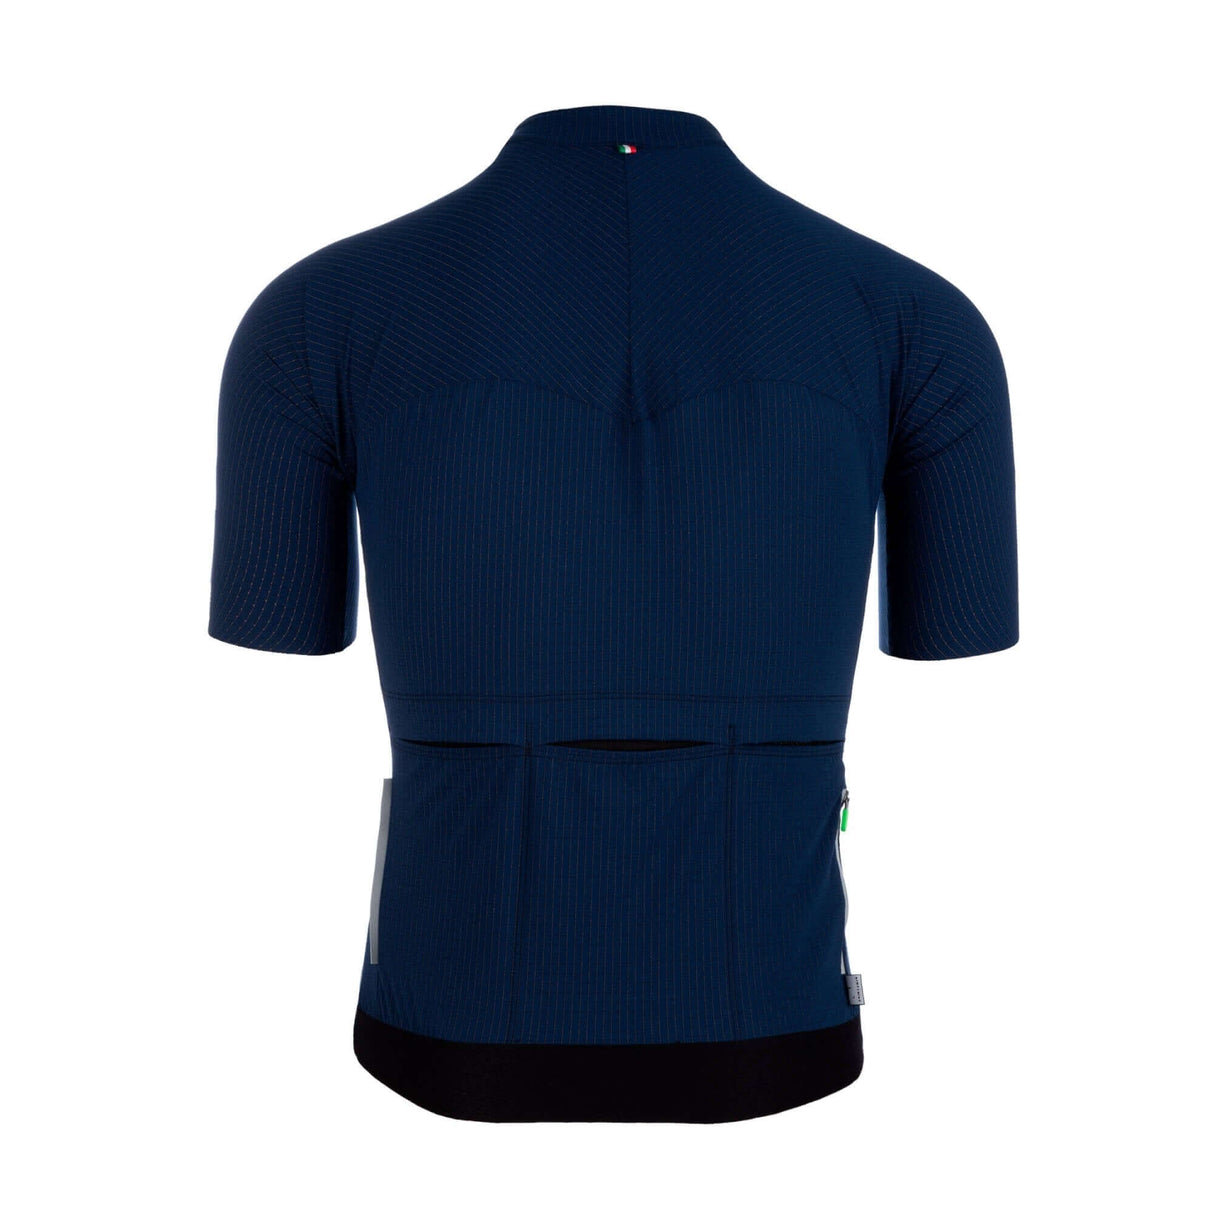 Q36.5 L1 Pinstripe X Short Sleeve Jersey | Strictly Bicycles